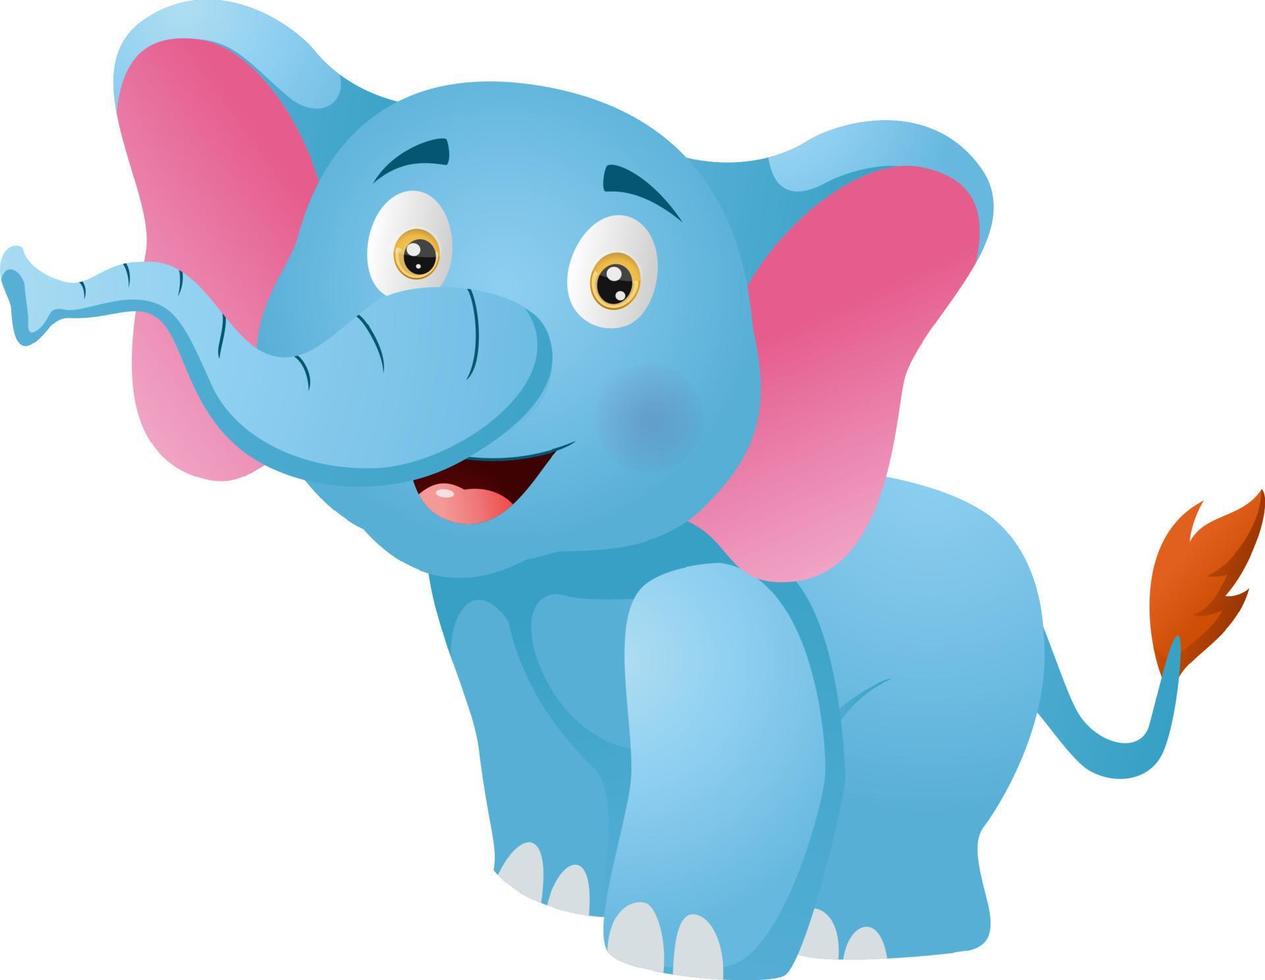 Cute elephant on white background vector